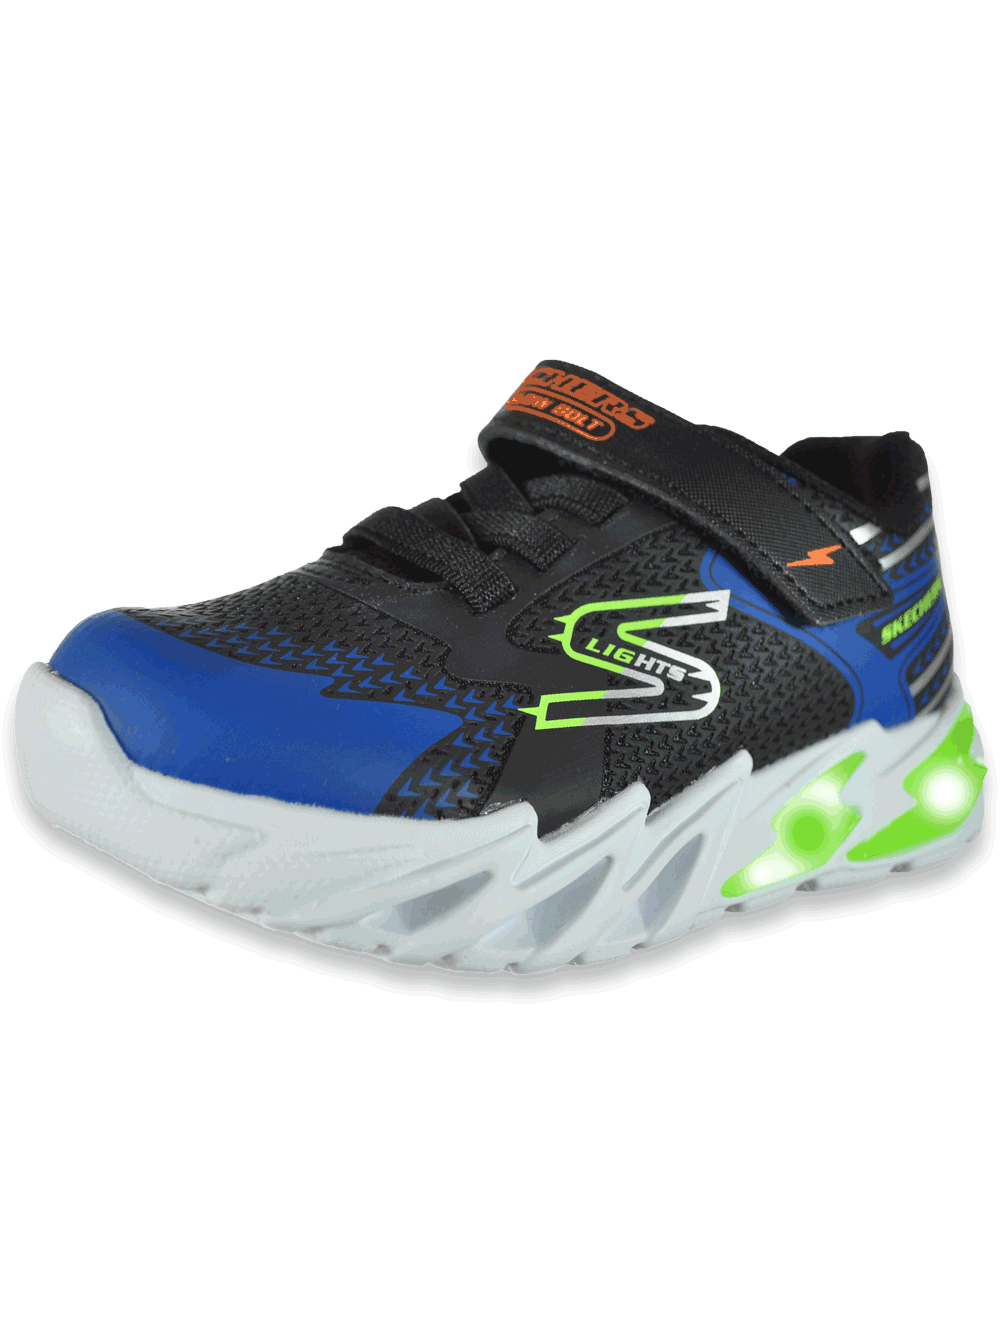 Skechers Sneakers - Twisty Brights-novlo - 401650N-NVBL - Online shop for  sneakers, shoes and boots